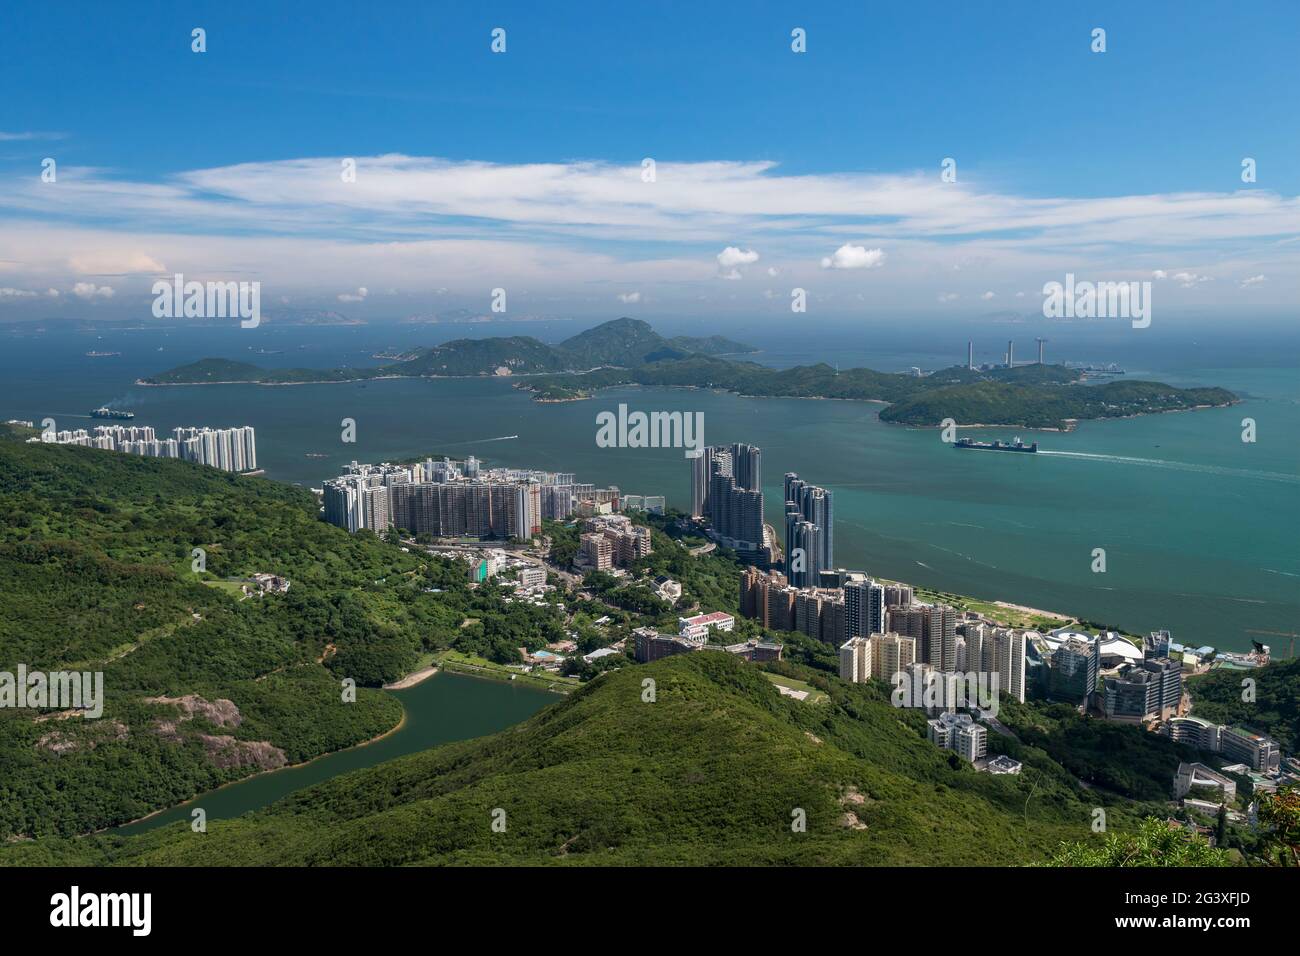 Ships in East Lamma Channel steam past tech hub Cyberport and the high-rise residential towers of Pok Fu Lam, Hong Kong Island Stock Photo